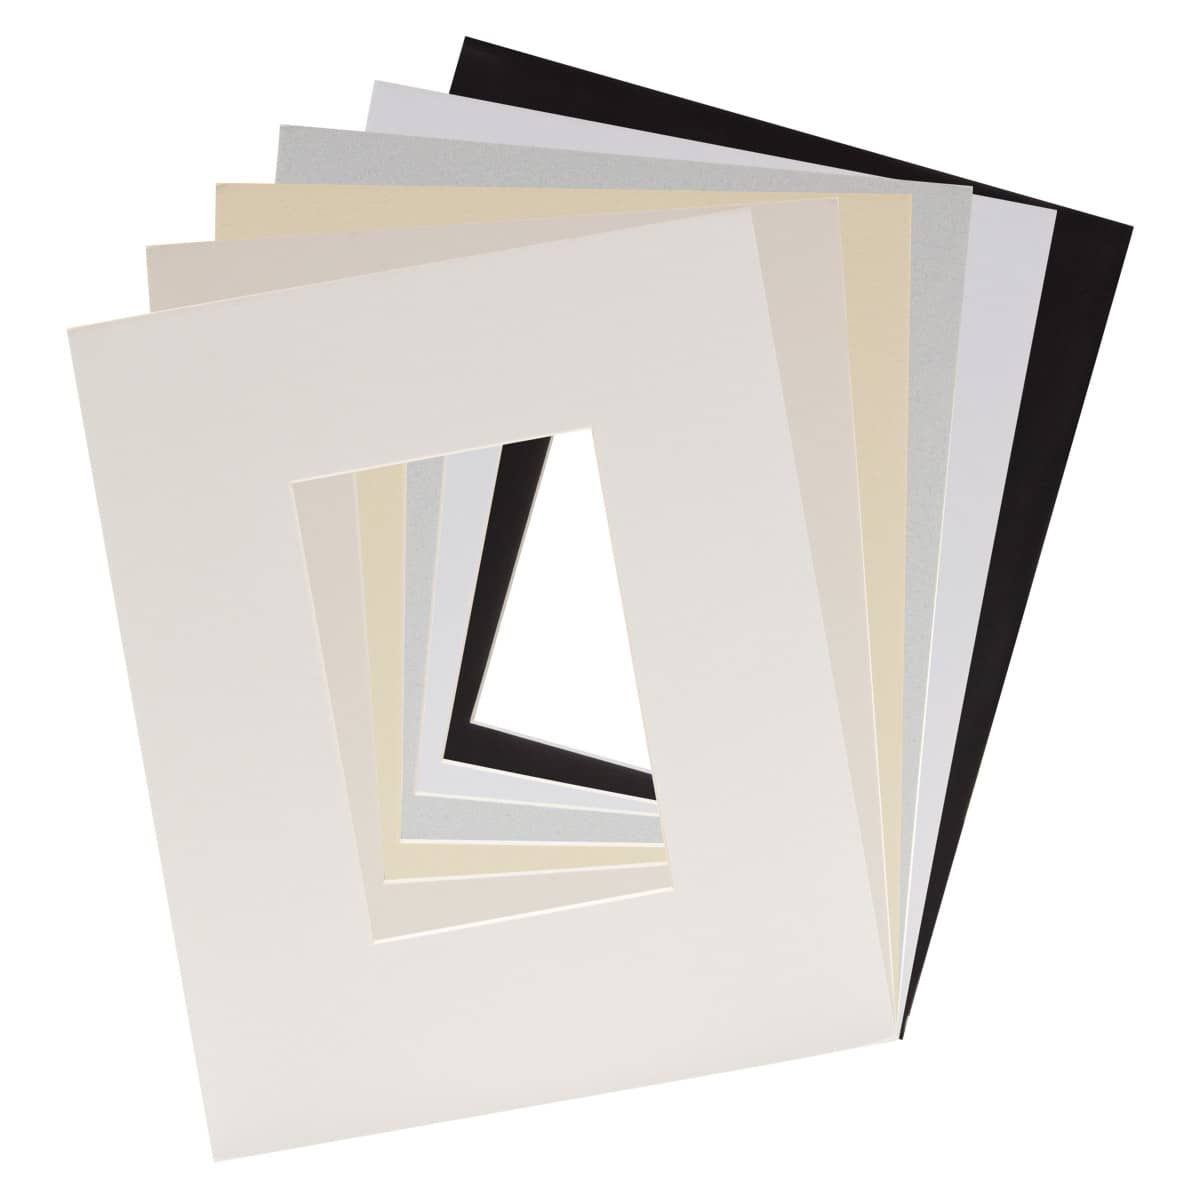 Foam Core Backing Board 3/8 White 16x20- 5 Pack. Many Sizes Available.  Acid Free Buffered Craft Poster Board for Signs, Presentations, School,  Office